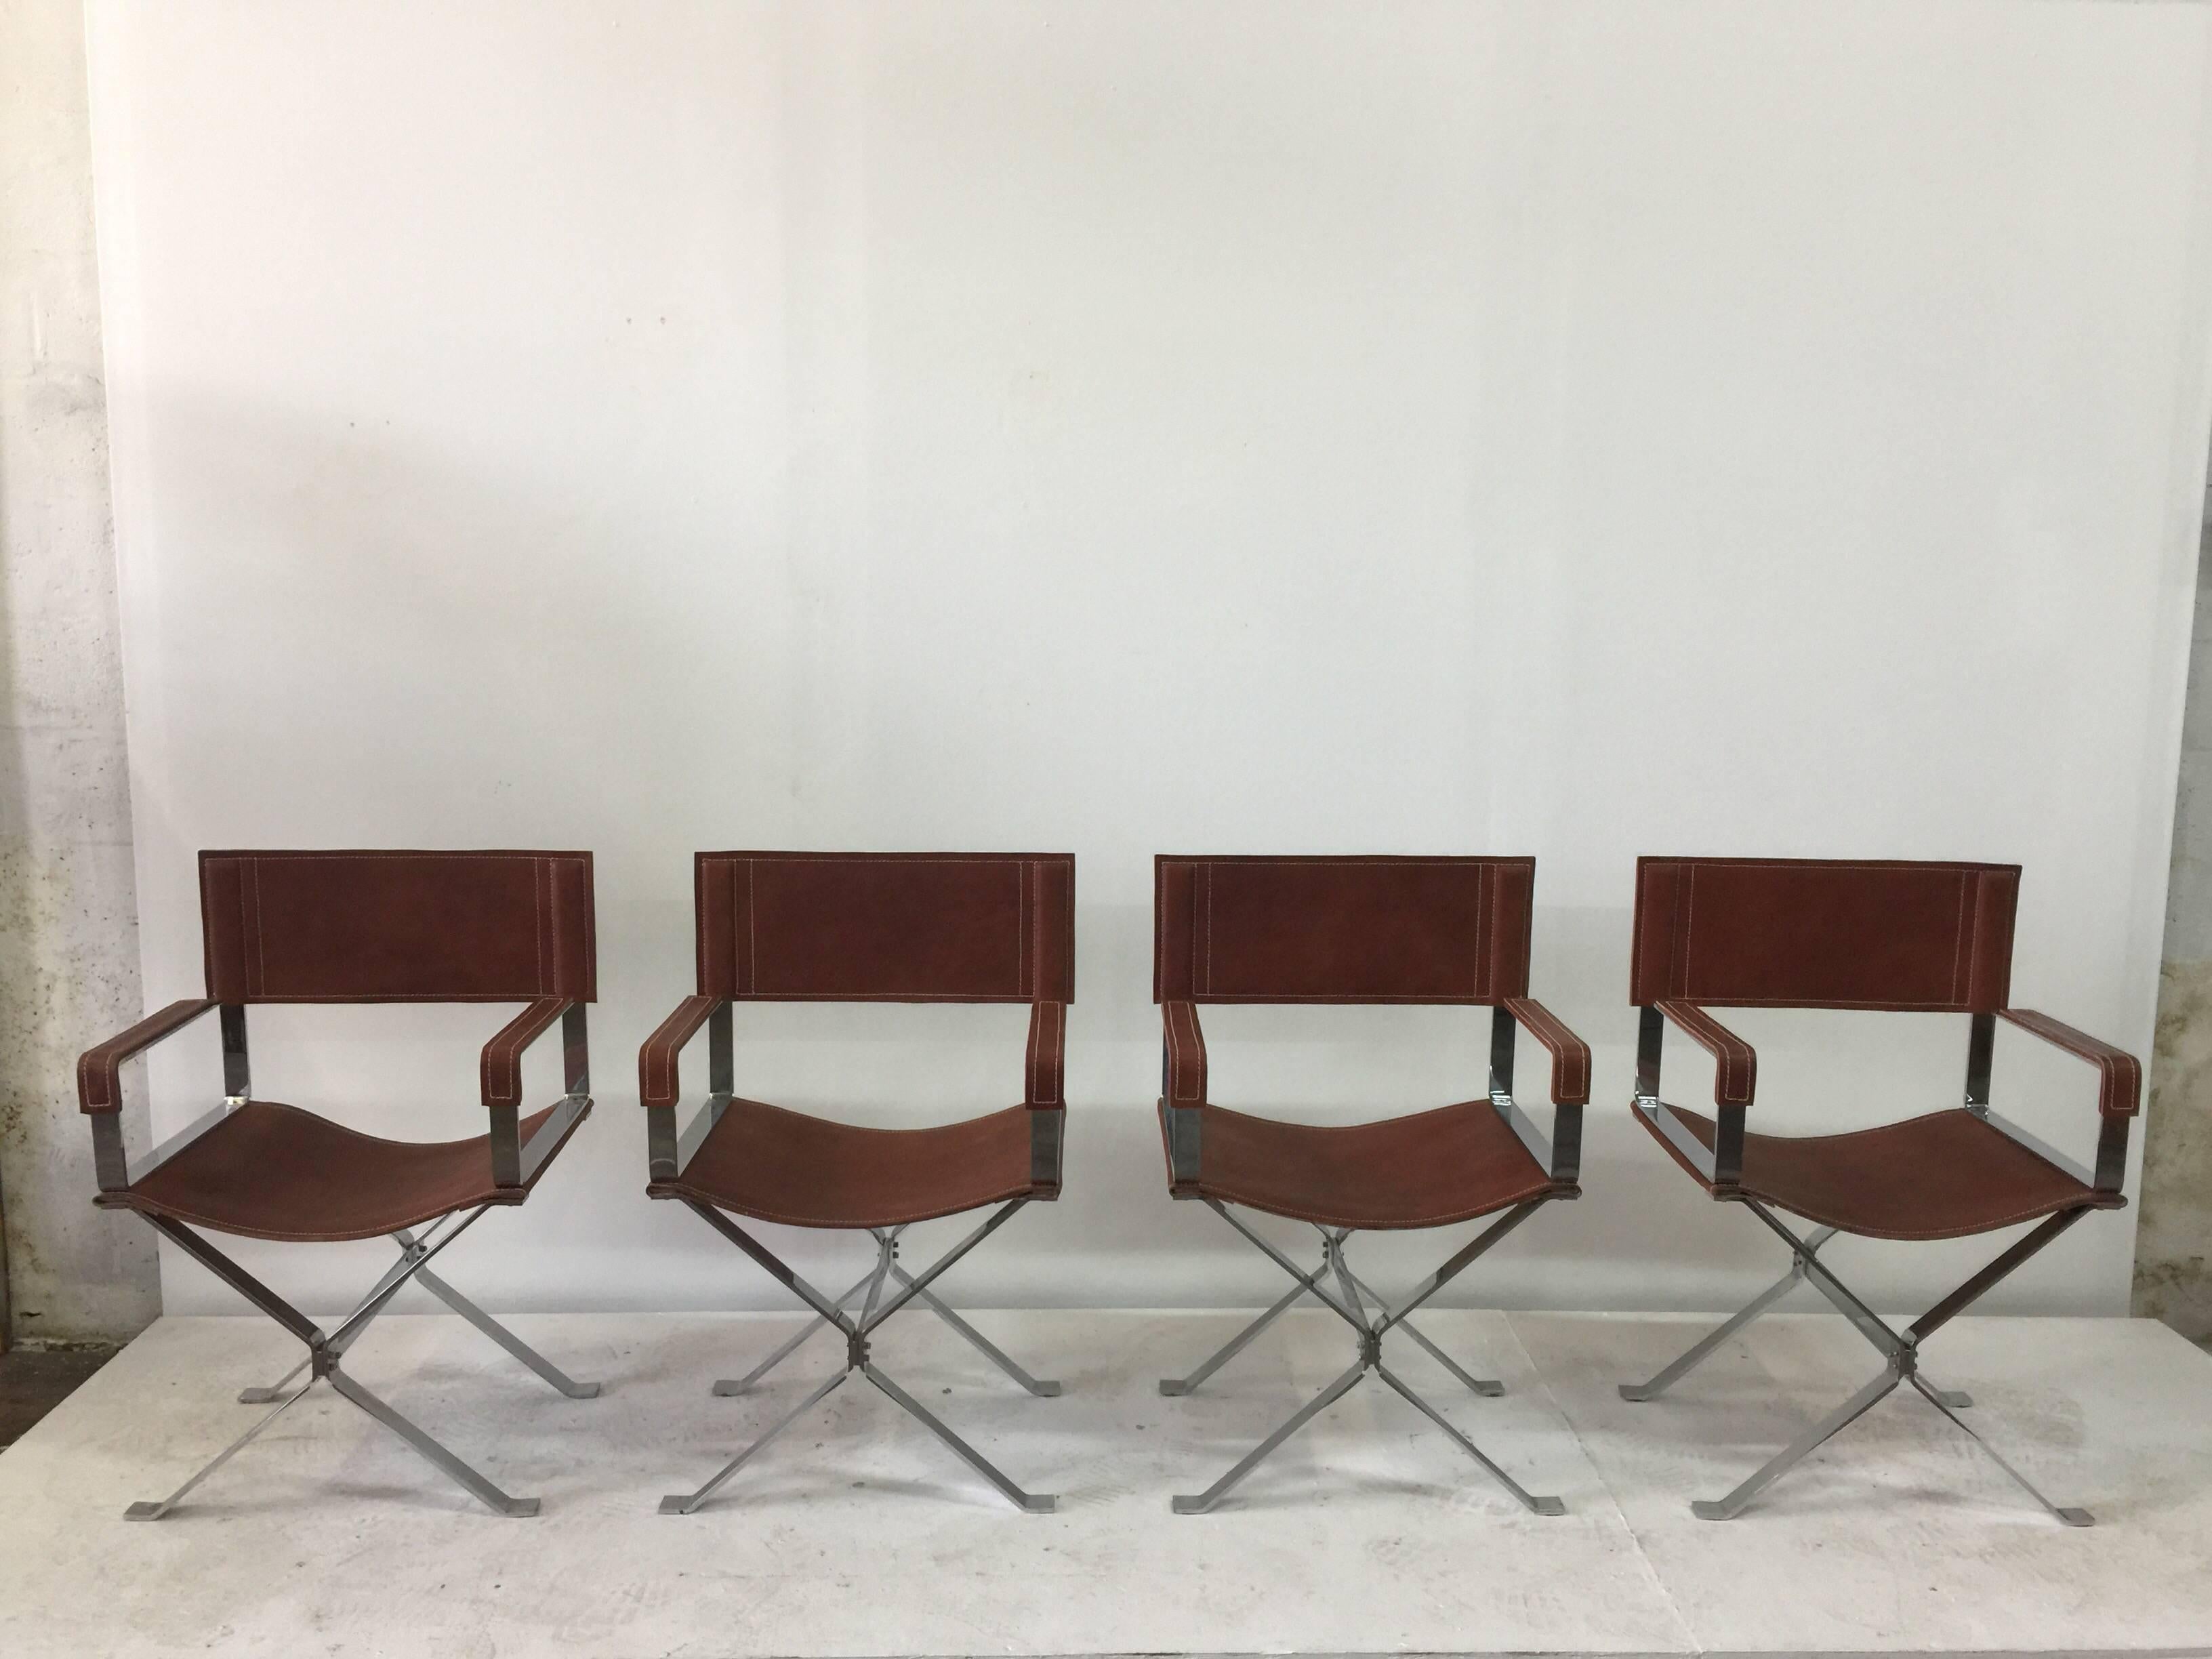 Flat bar steel frame and Cognac stitched leather. These director style armchairs are wonderful vintage Italian design by Alessandro Albrizzi.    
Note: Four quality armchairs!